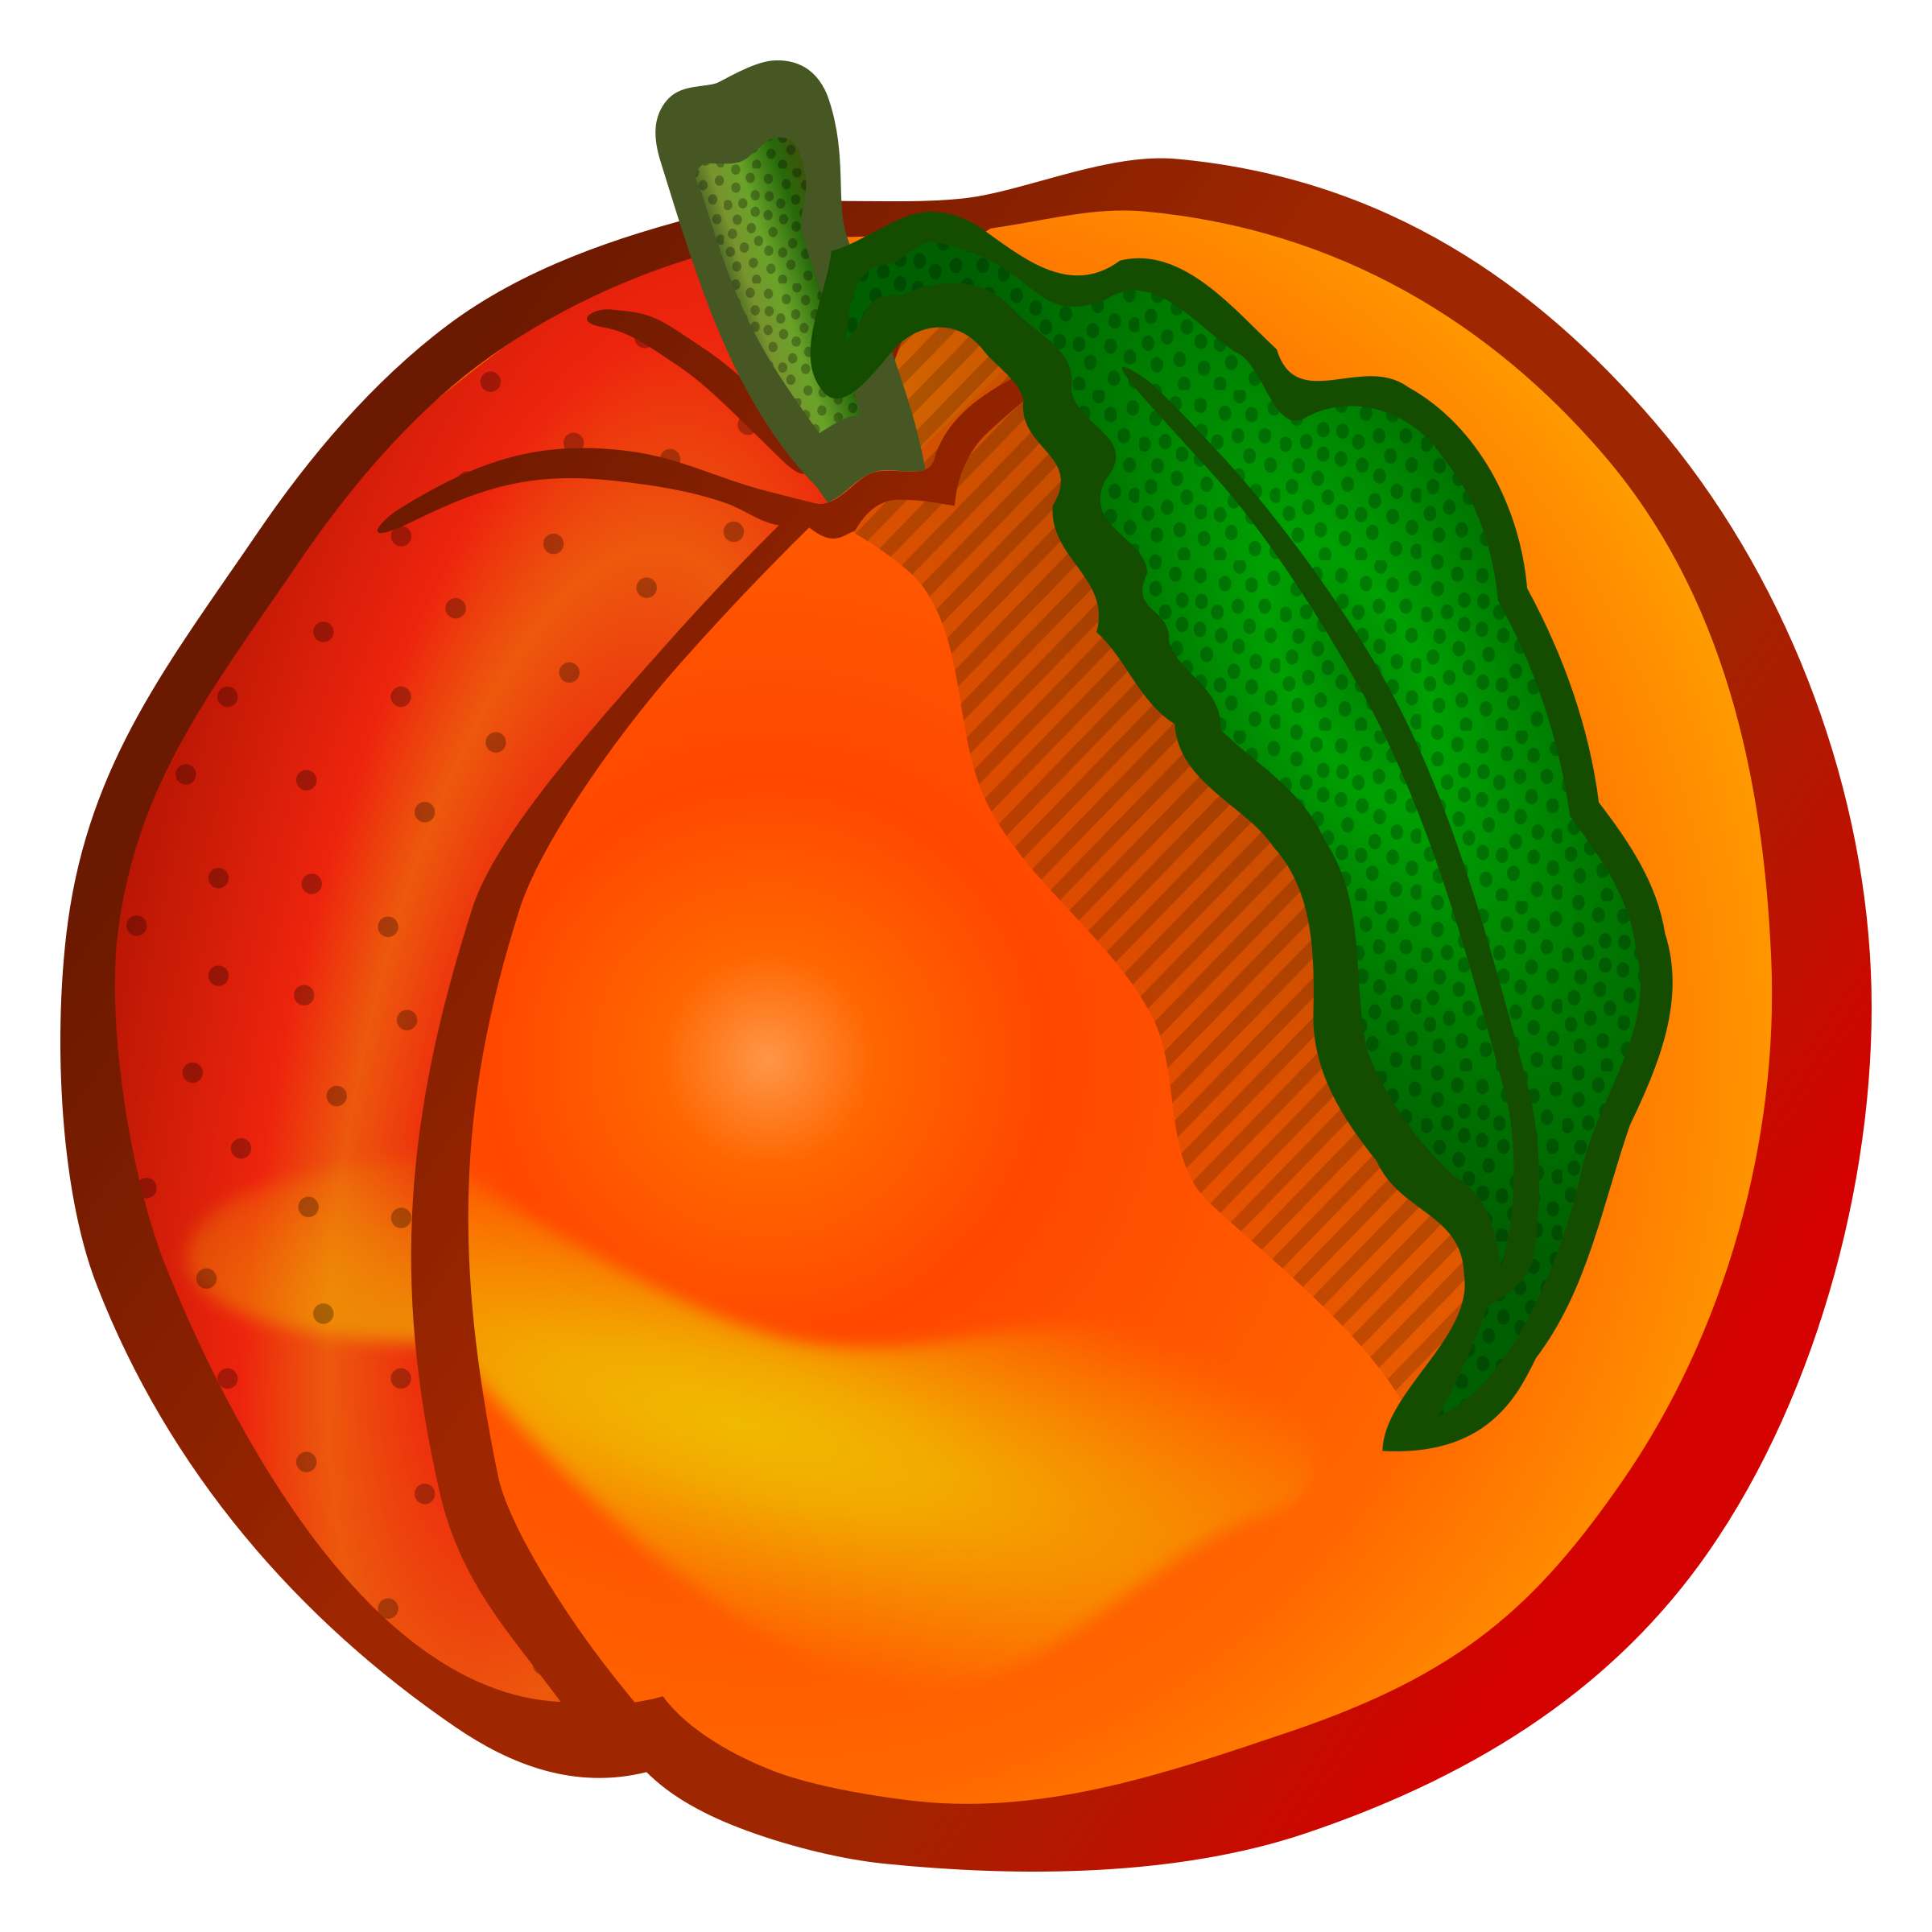 Peach clipart #4, Download drawings